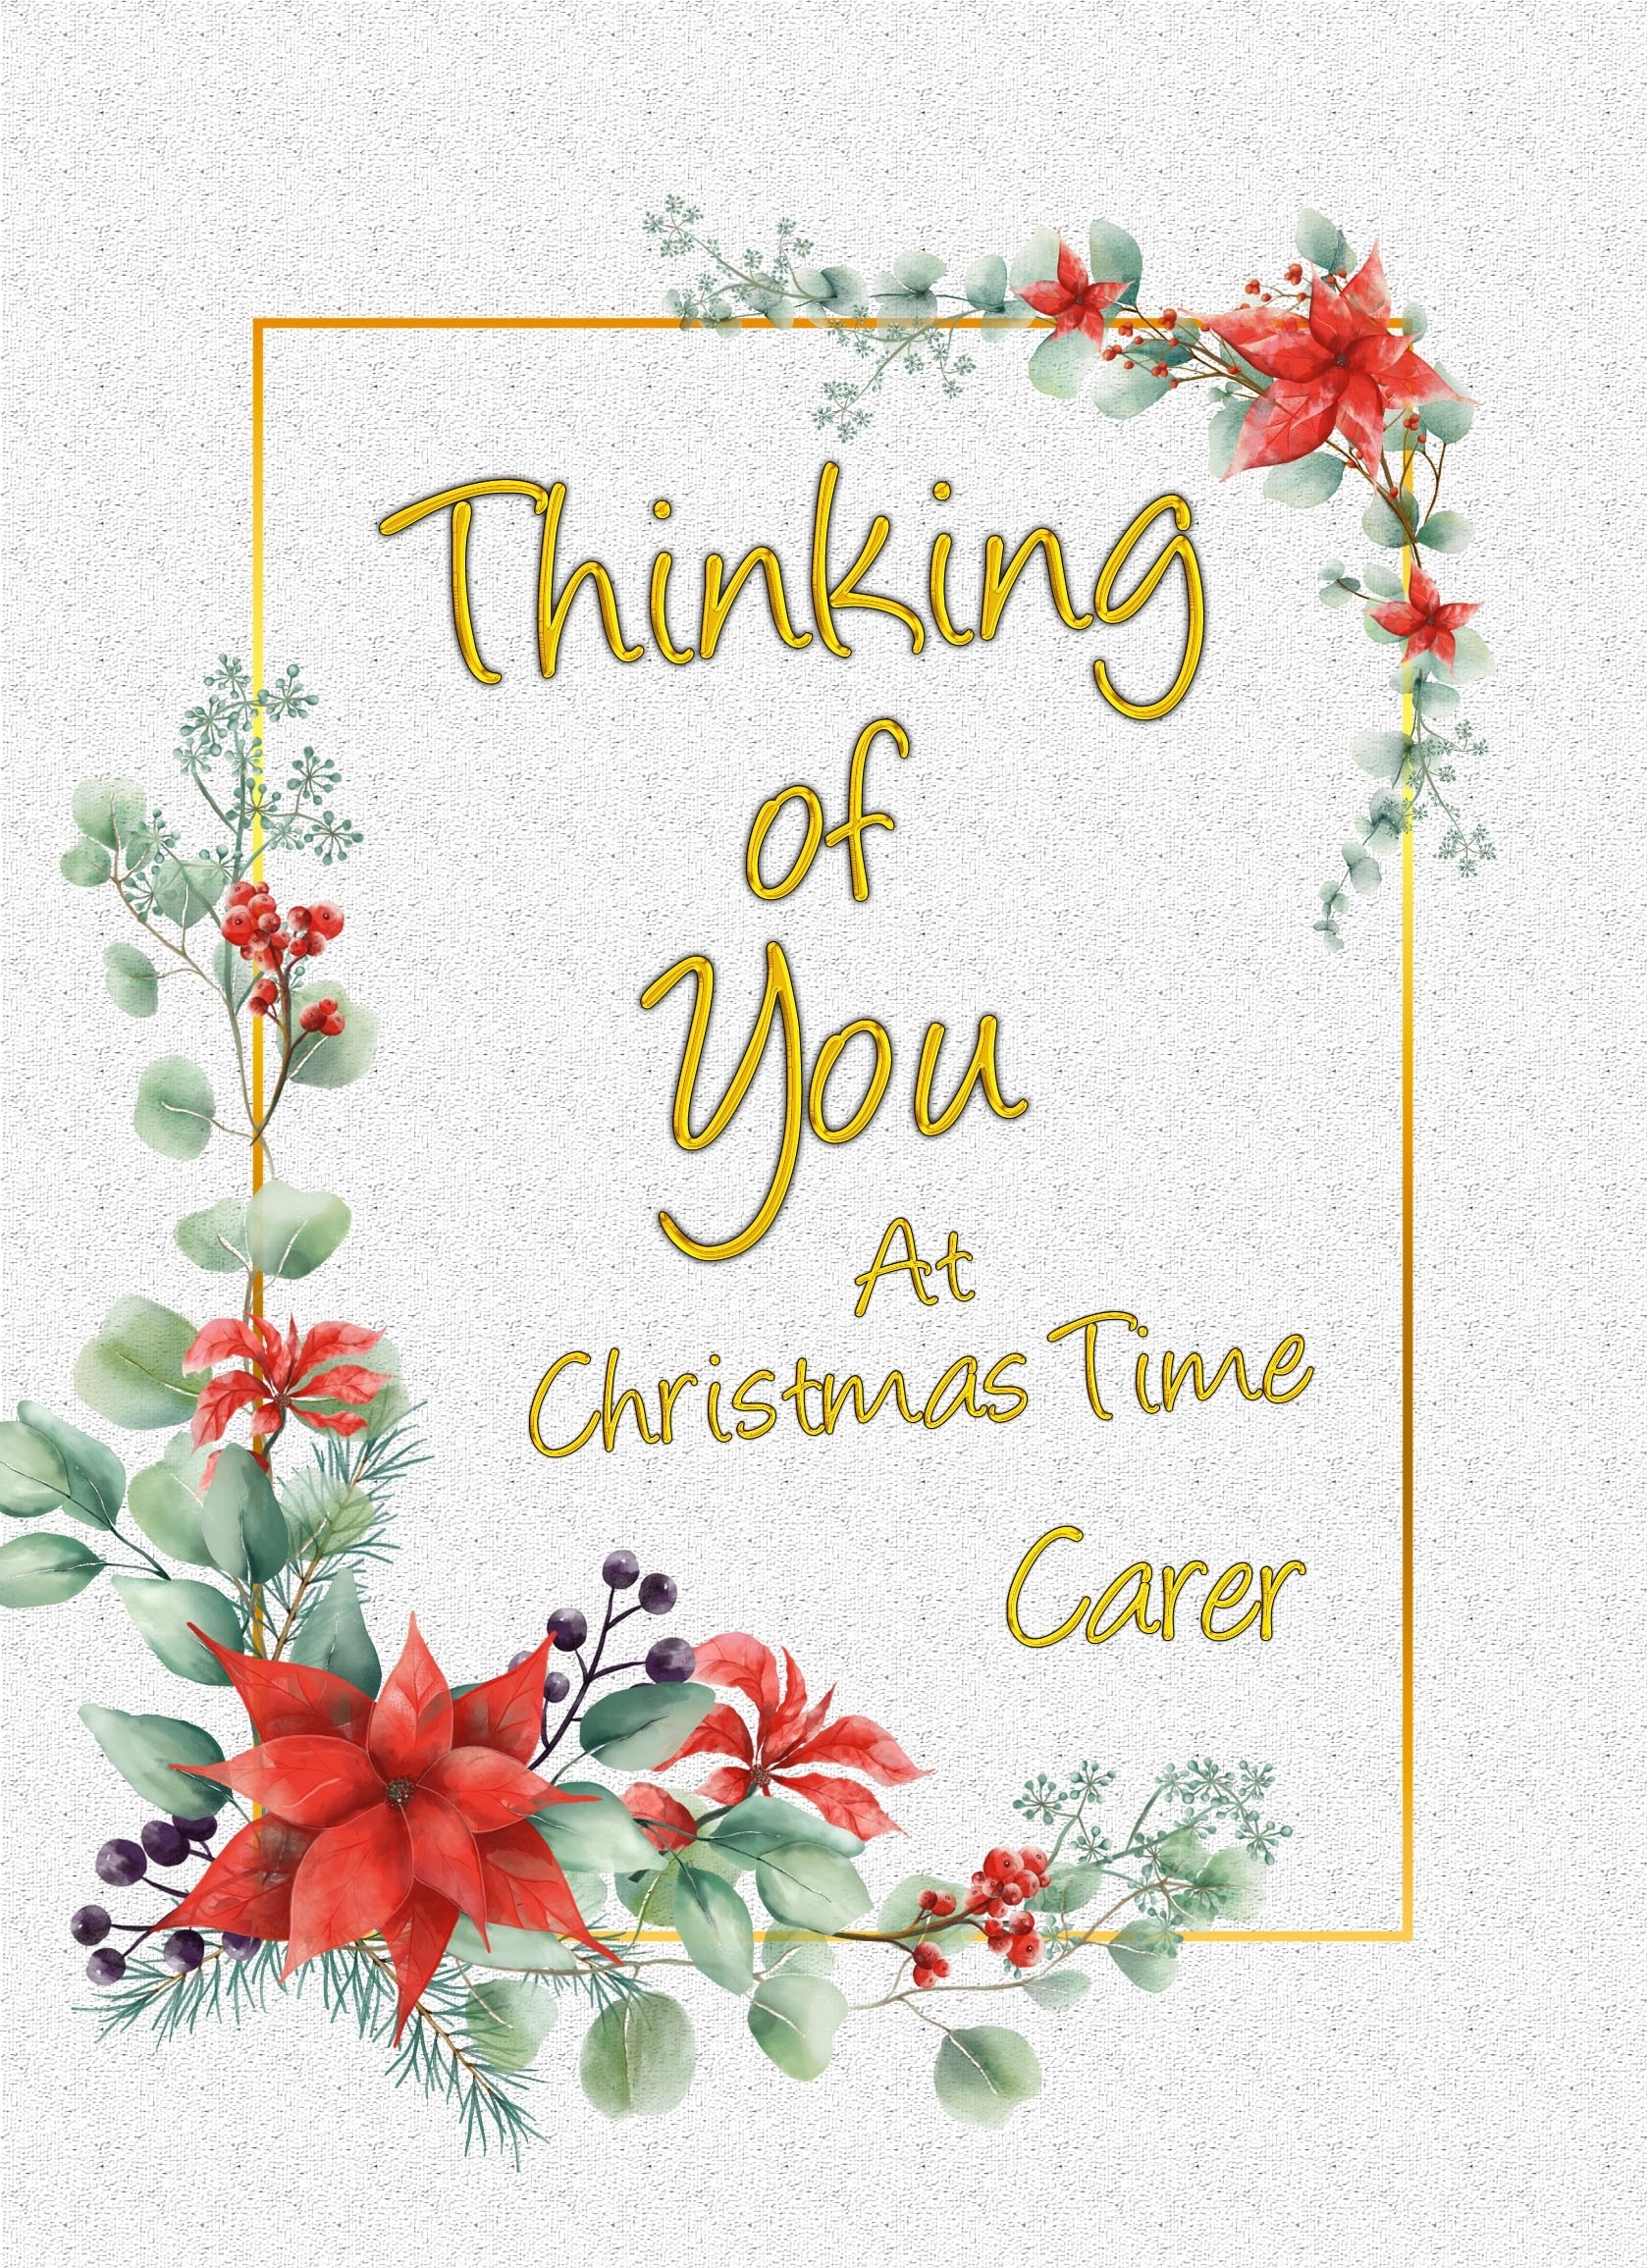 Thinking of You at Christmas Card For Carer